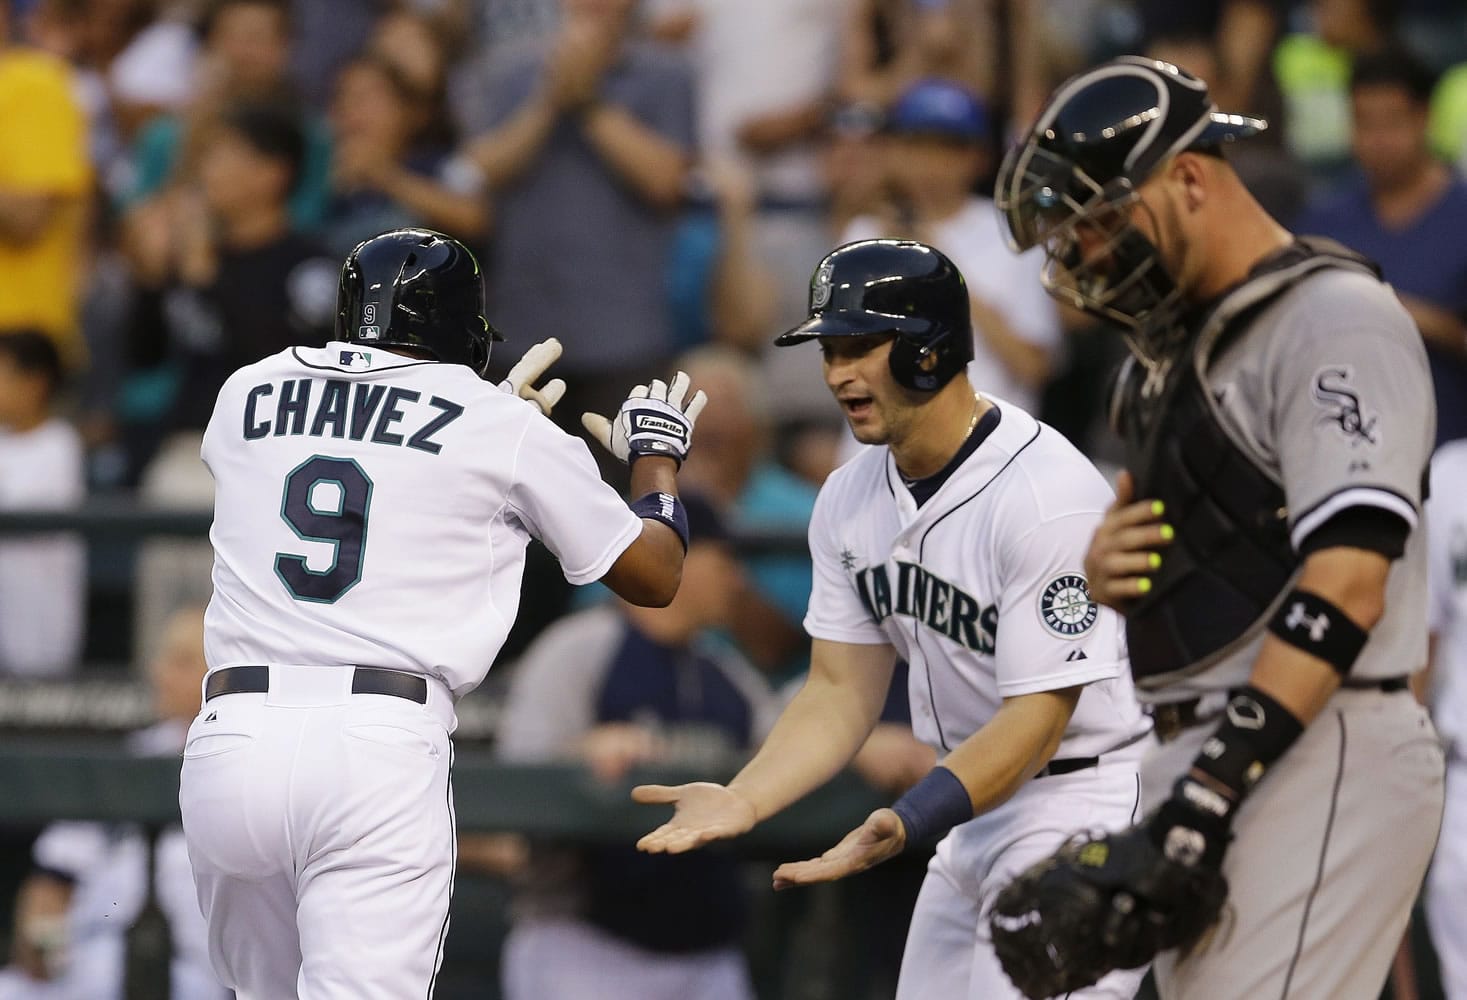 Seattle Mariners' Endy Chavez (9) is greeted at the plate by Mike Zunino, center, as Chicago White Sox catcher Tyler Flowers watches at right, after Chavez hit a two-run home run in the fourth inning of a baseball game, Thursday, Aug. 7, 2014, in Seattle. (AP Photo/Ted S.